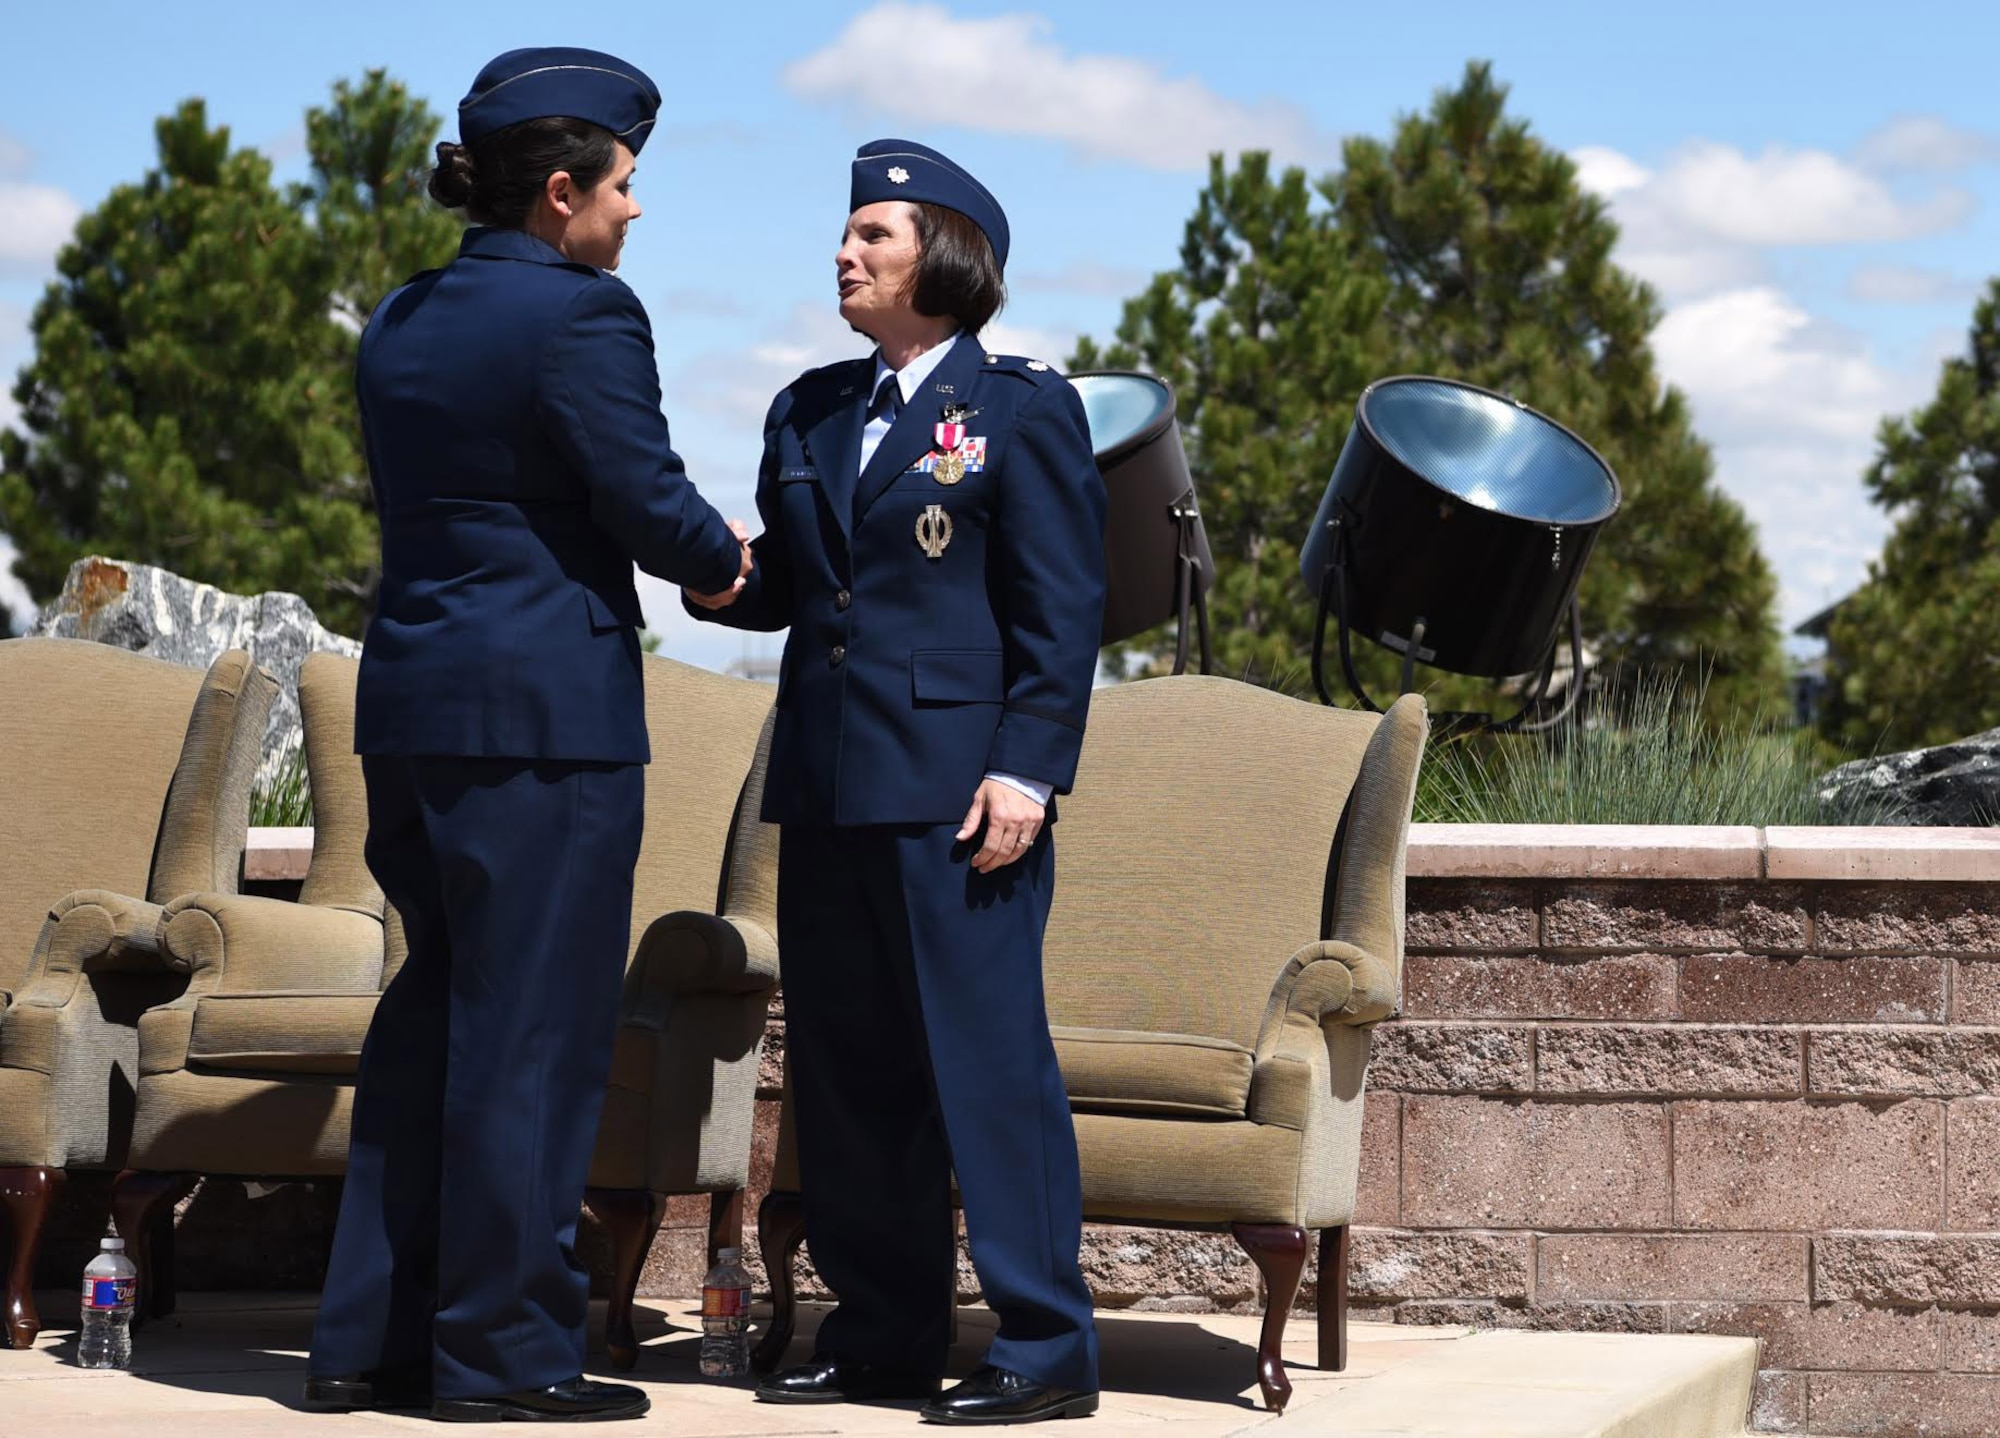 From left to right: Lt. Col. Shannon DaSilva, 2nd Space Warning Squadron commander, shares words with Lt. Col. April Wimmer, 2nd SWS parting commander, after their change of command ceremony May 11, 2017. At Buckley Air Force Base, Colo. Shannon is now responsible for the primary operations unit within the 460th OG, which continues to operate a more than 40-year-old, $3.2 billion on-orbit Defense Support Program satellite constellation. (U.S. Air Force photo by Airman 1st Class Holden S. Faul/Released)